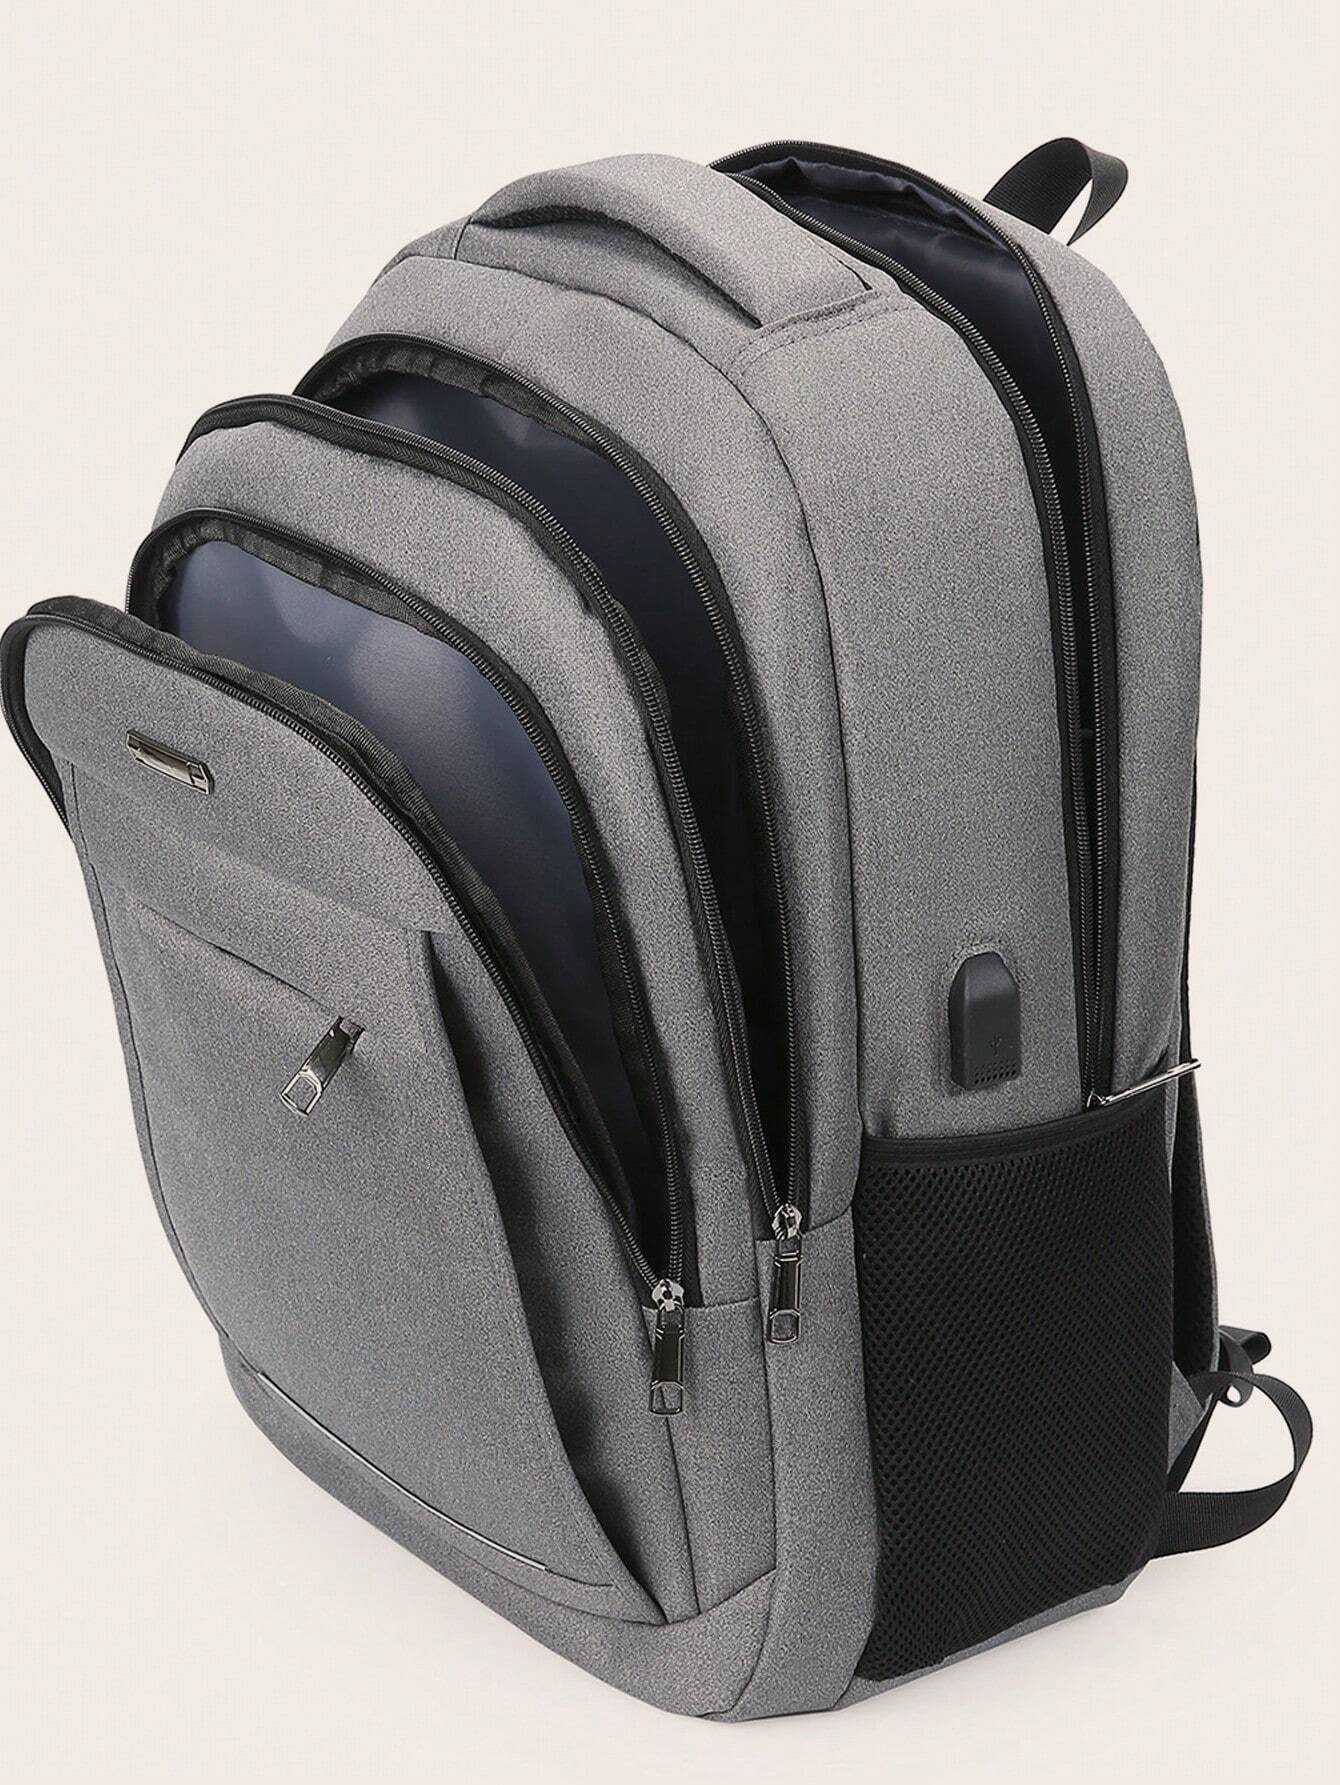 Medium Laptop Backpack Grey Minimalist With USB Charging Port For Business